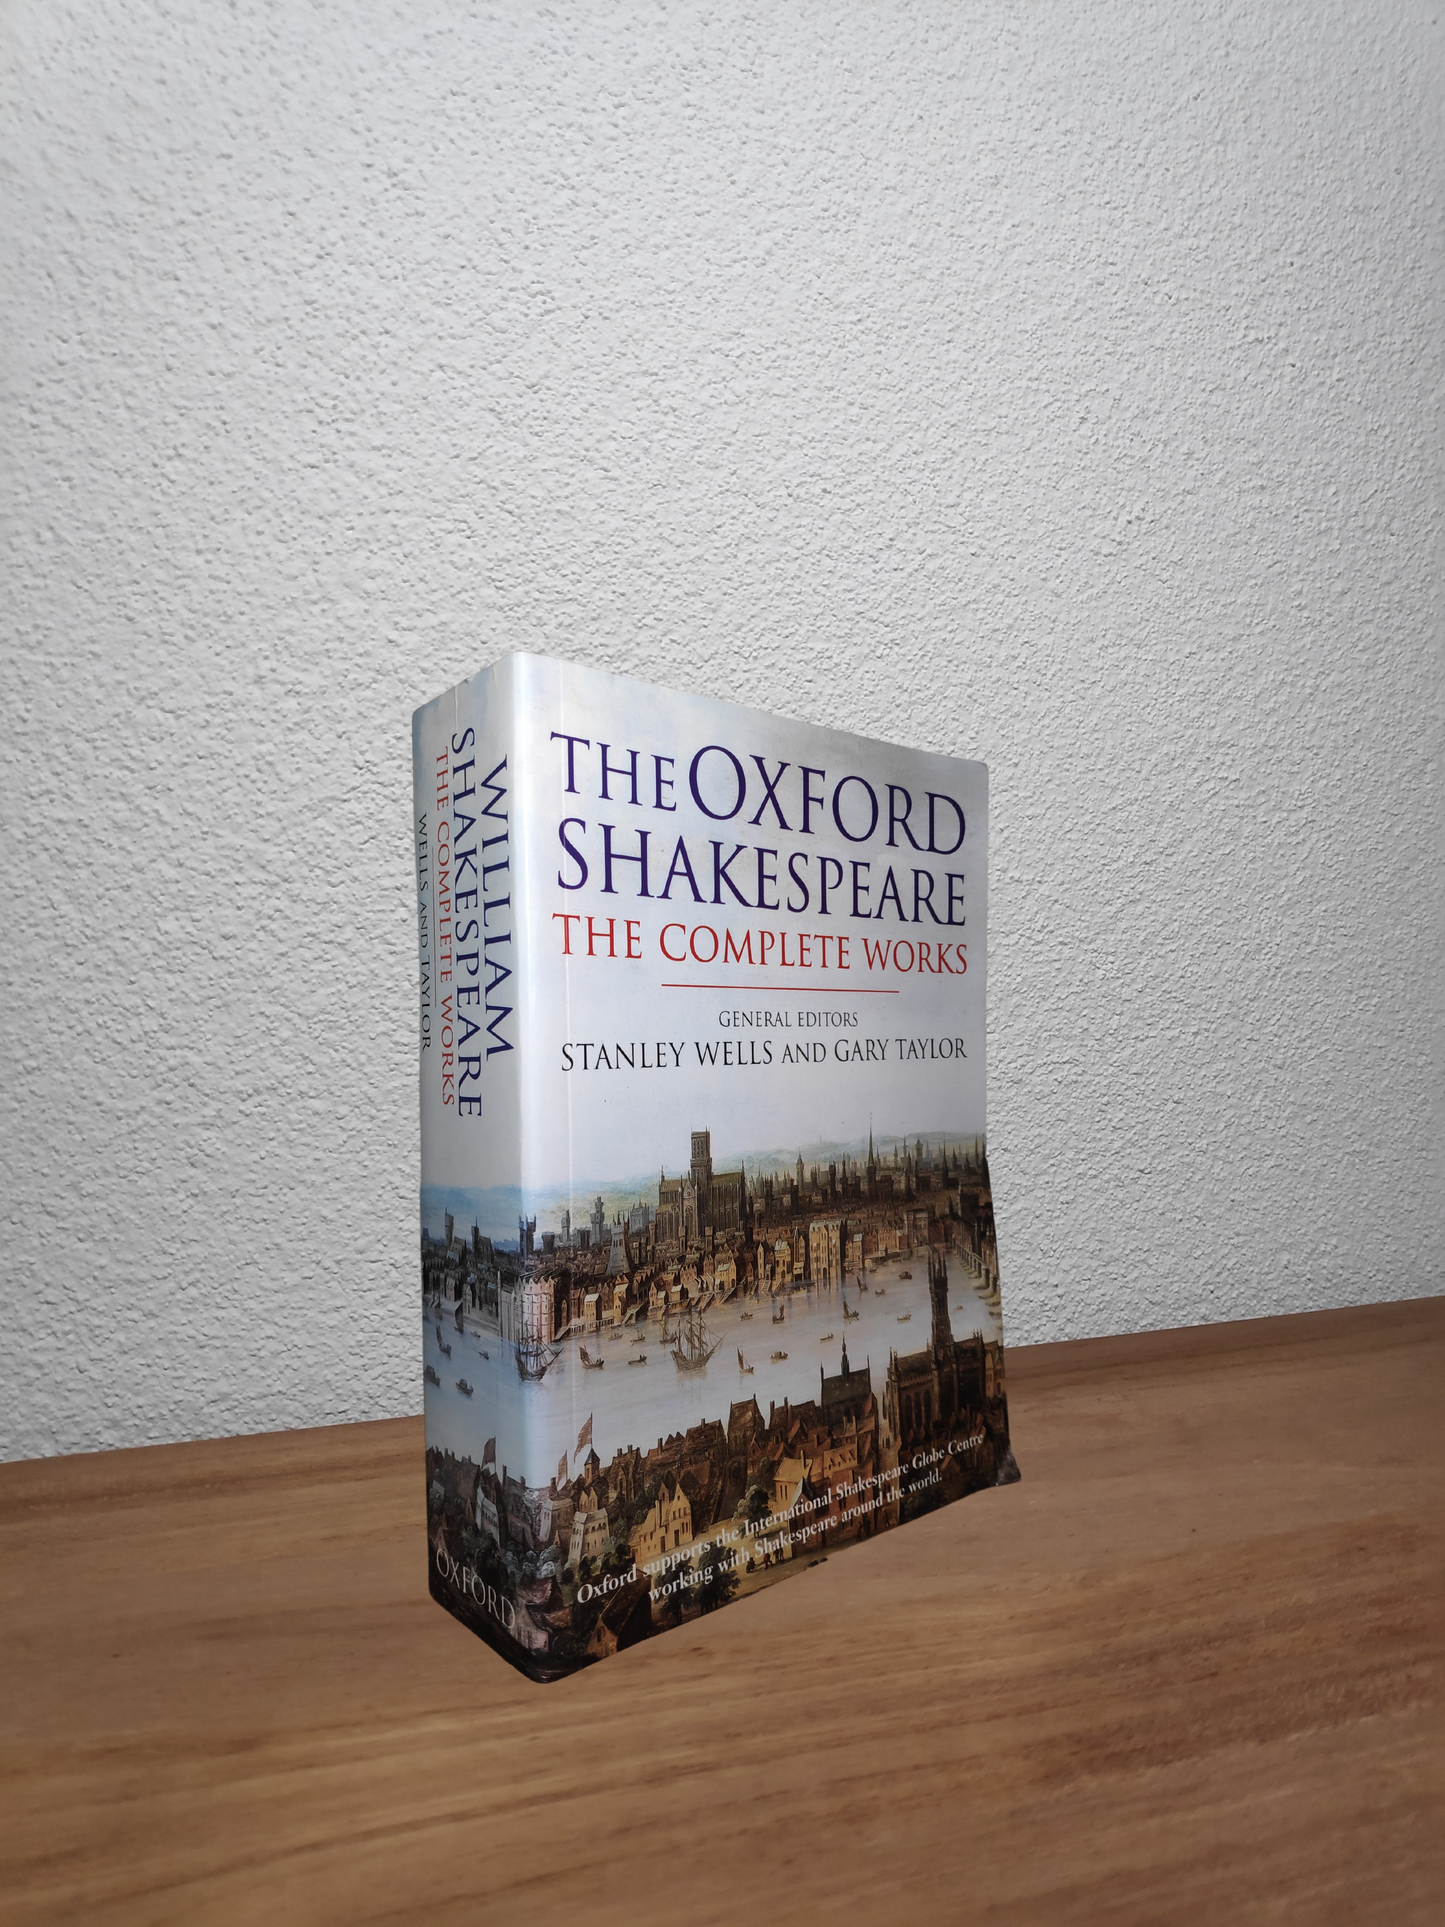 William Shakespeare - The Complete Works - Second-hand english book to deliver in Zurich & Switzerland